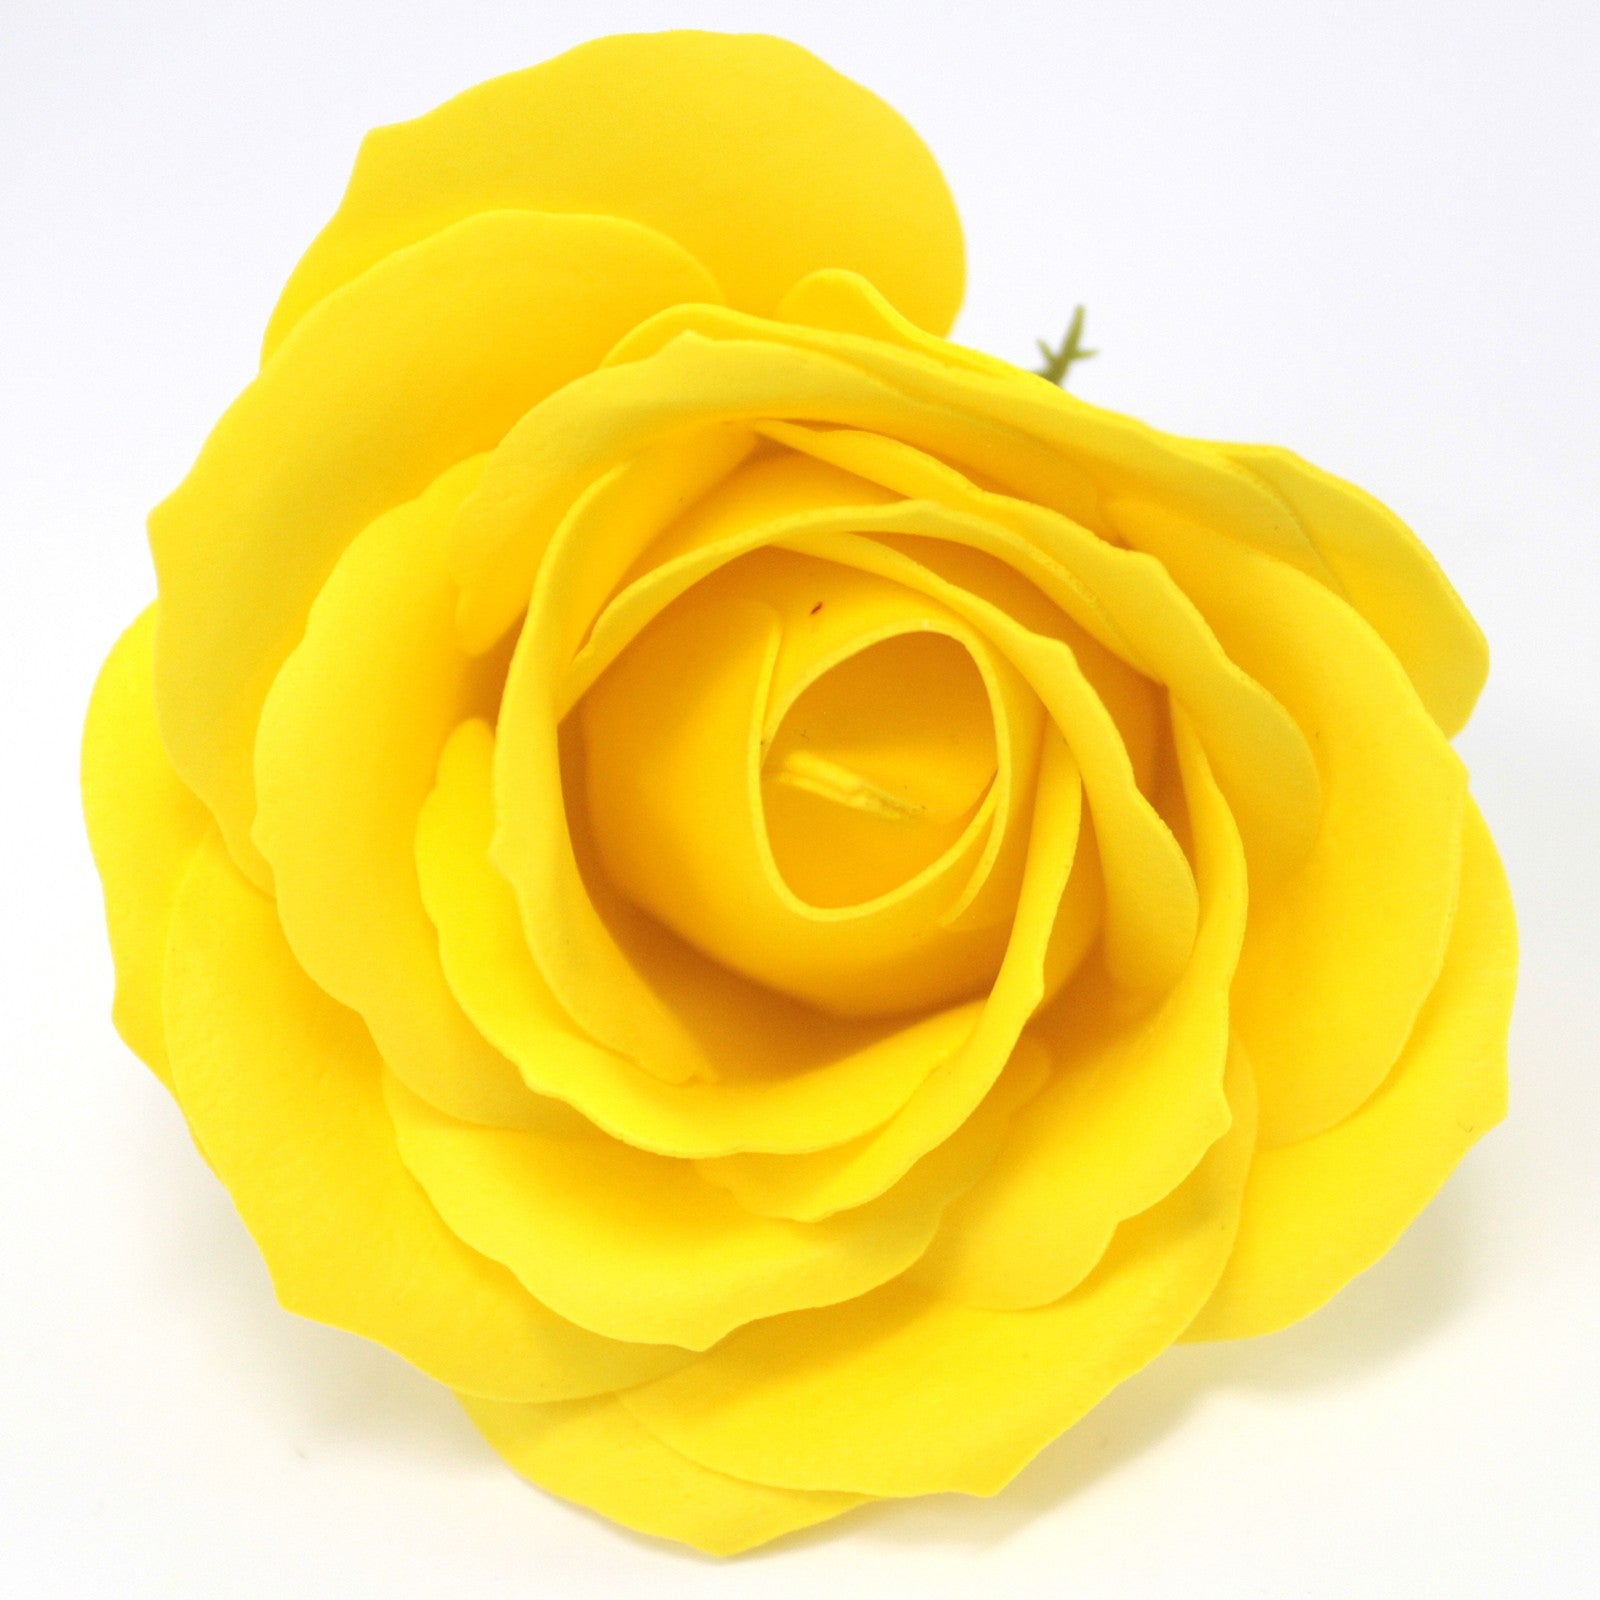 View Craft Soap Flowers Lrg Rose Yellow x 10 pcs information